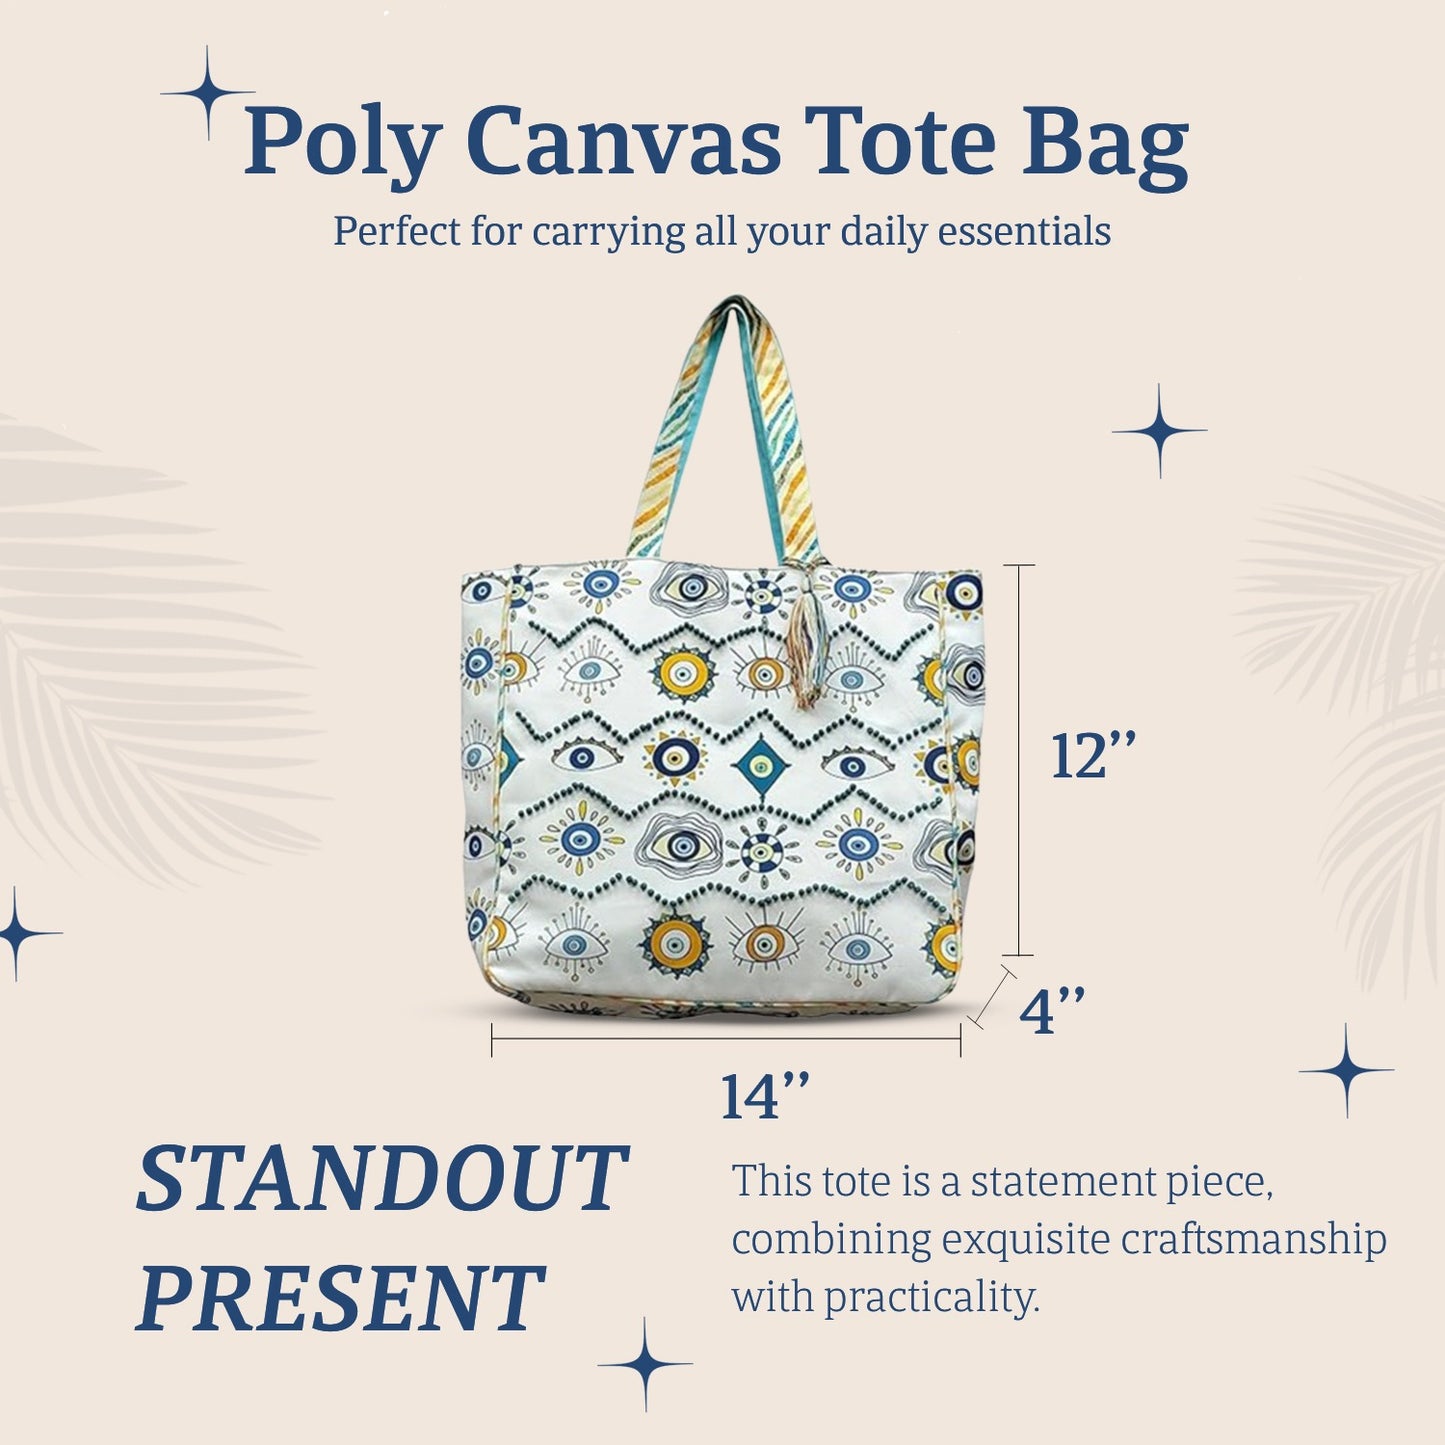 HHH Designs Poly Canvas Tote Bag with Embroidery and Lace Accents - Stylish & Versatile Carryall